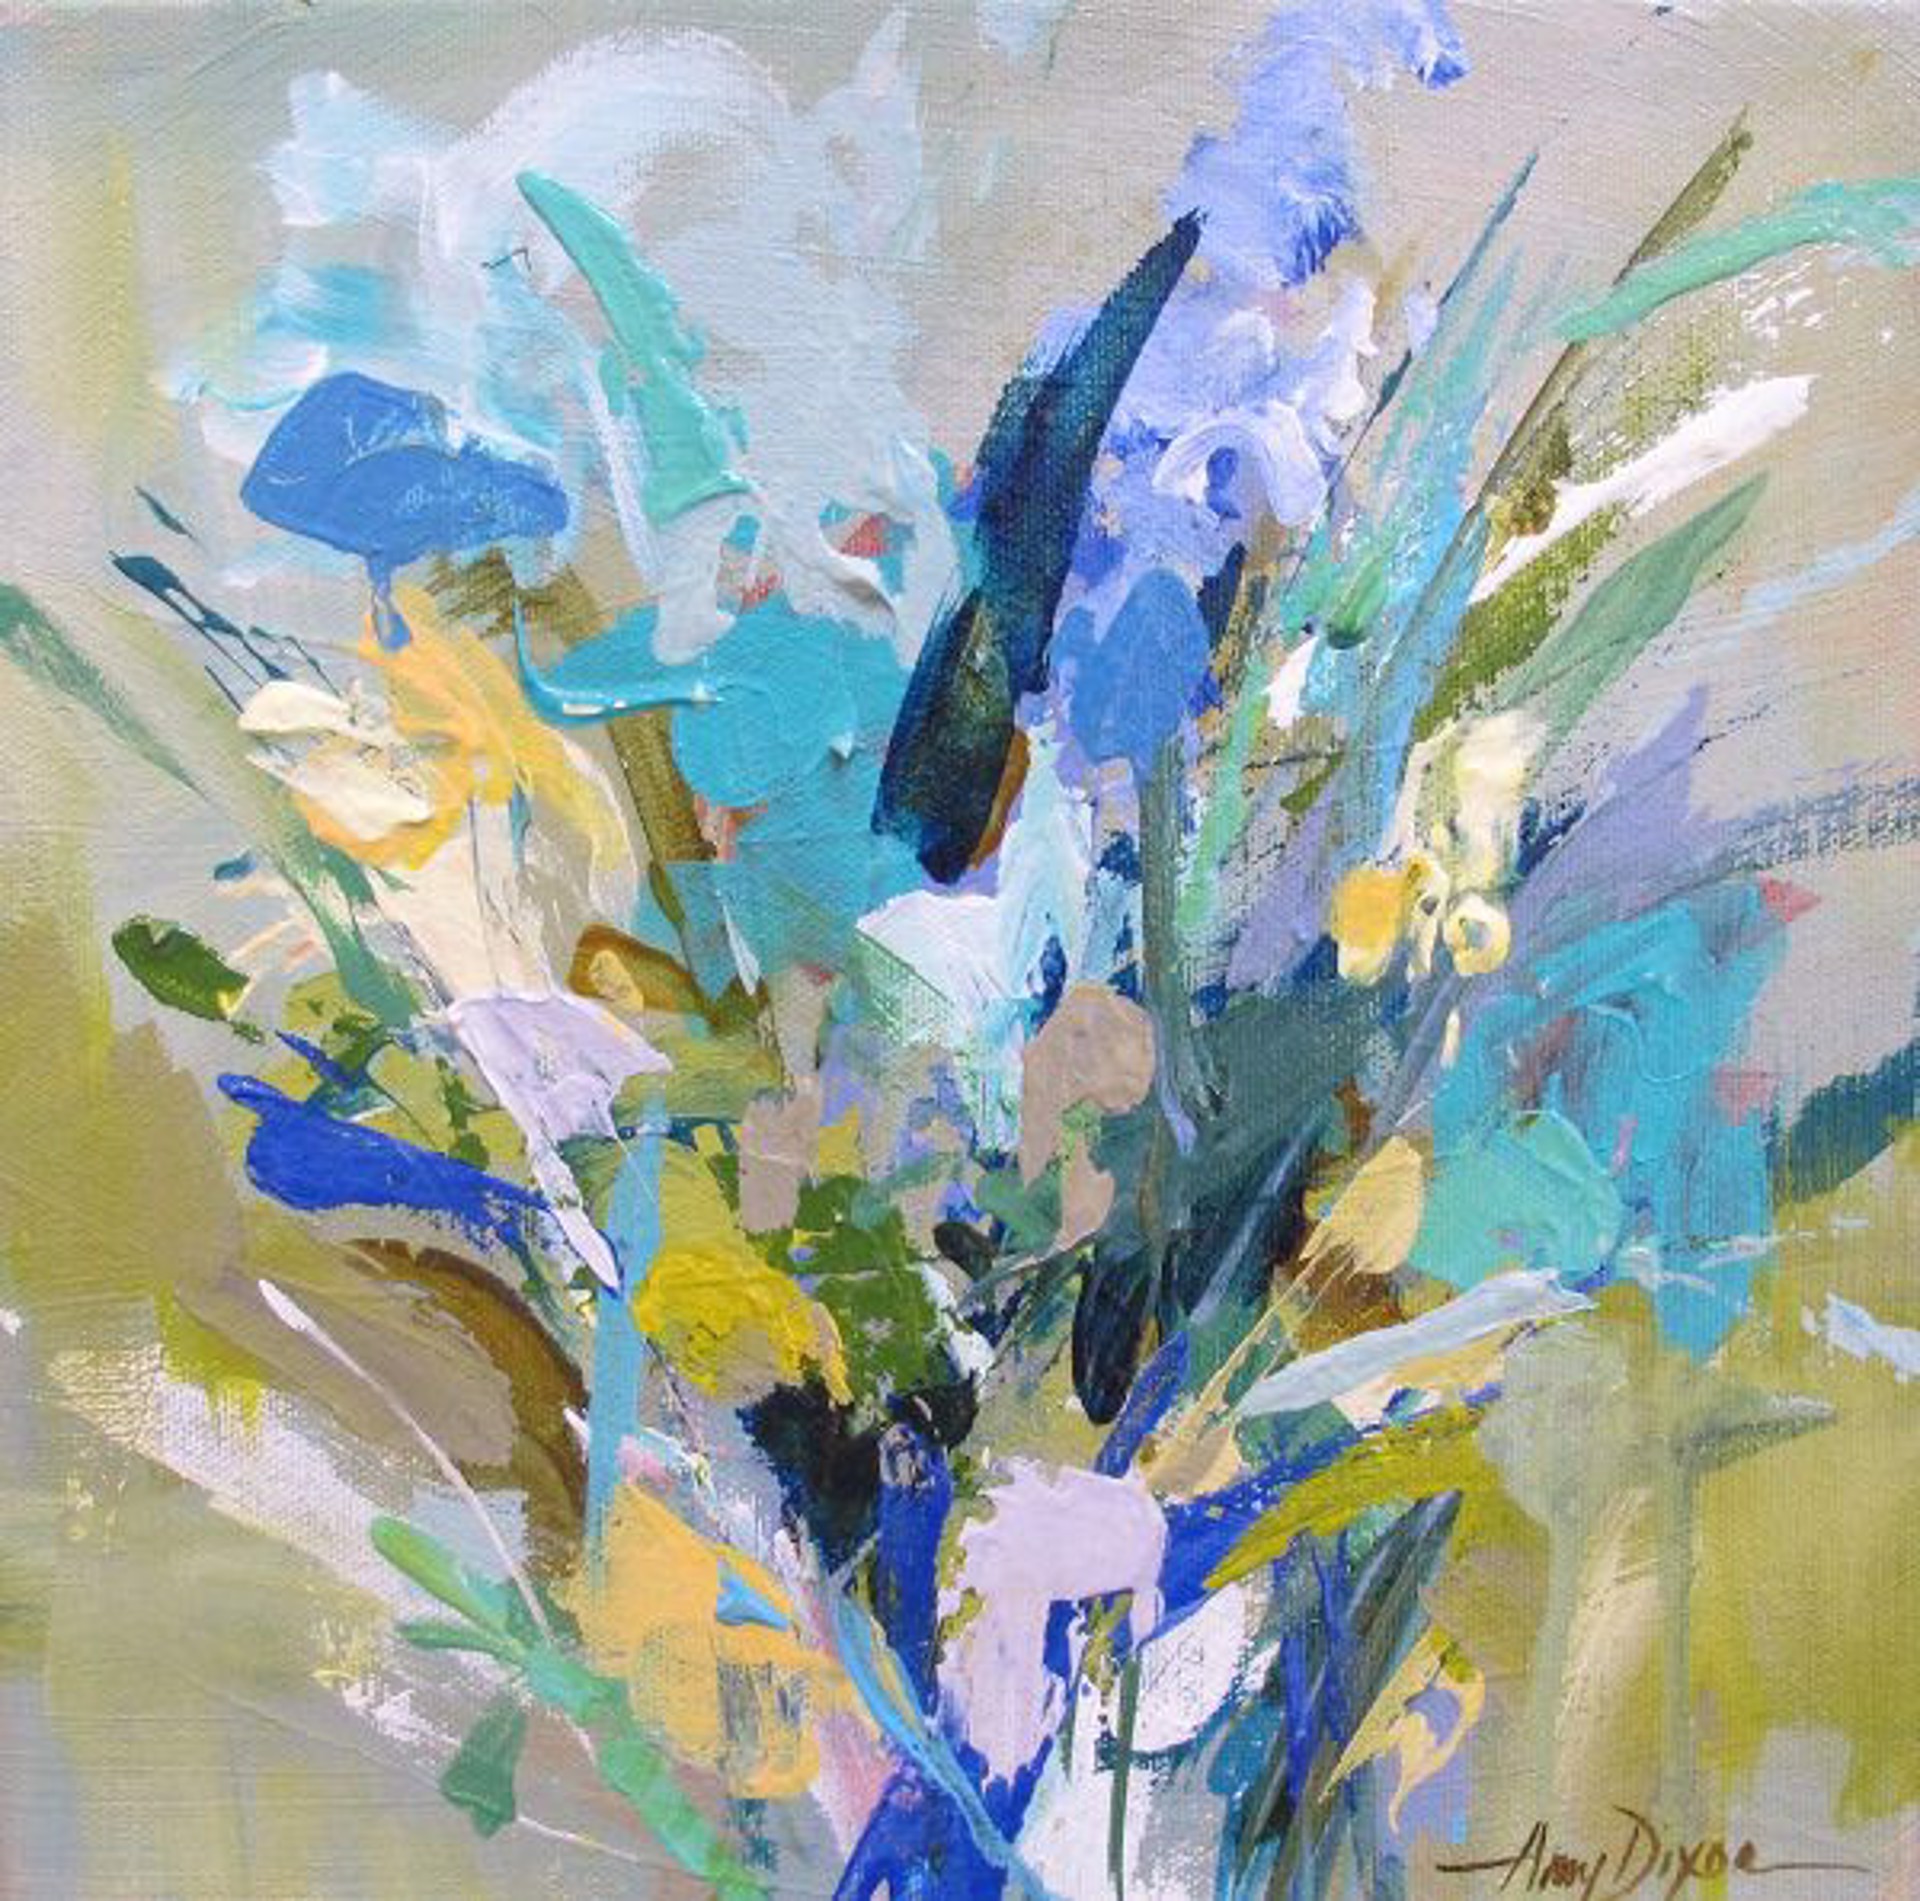 Expressions in Blue I by Amy Dixon